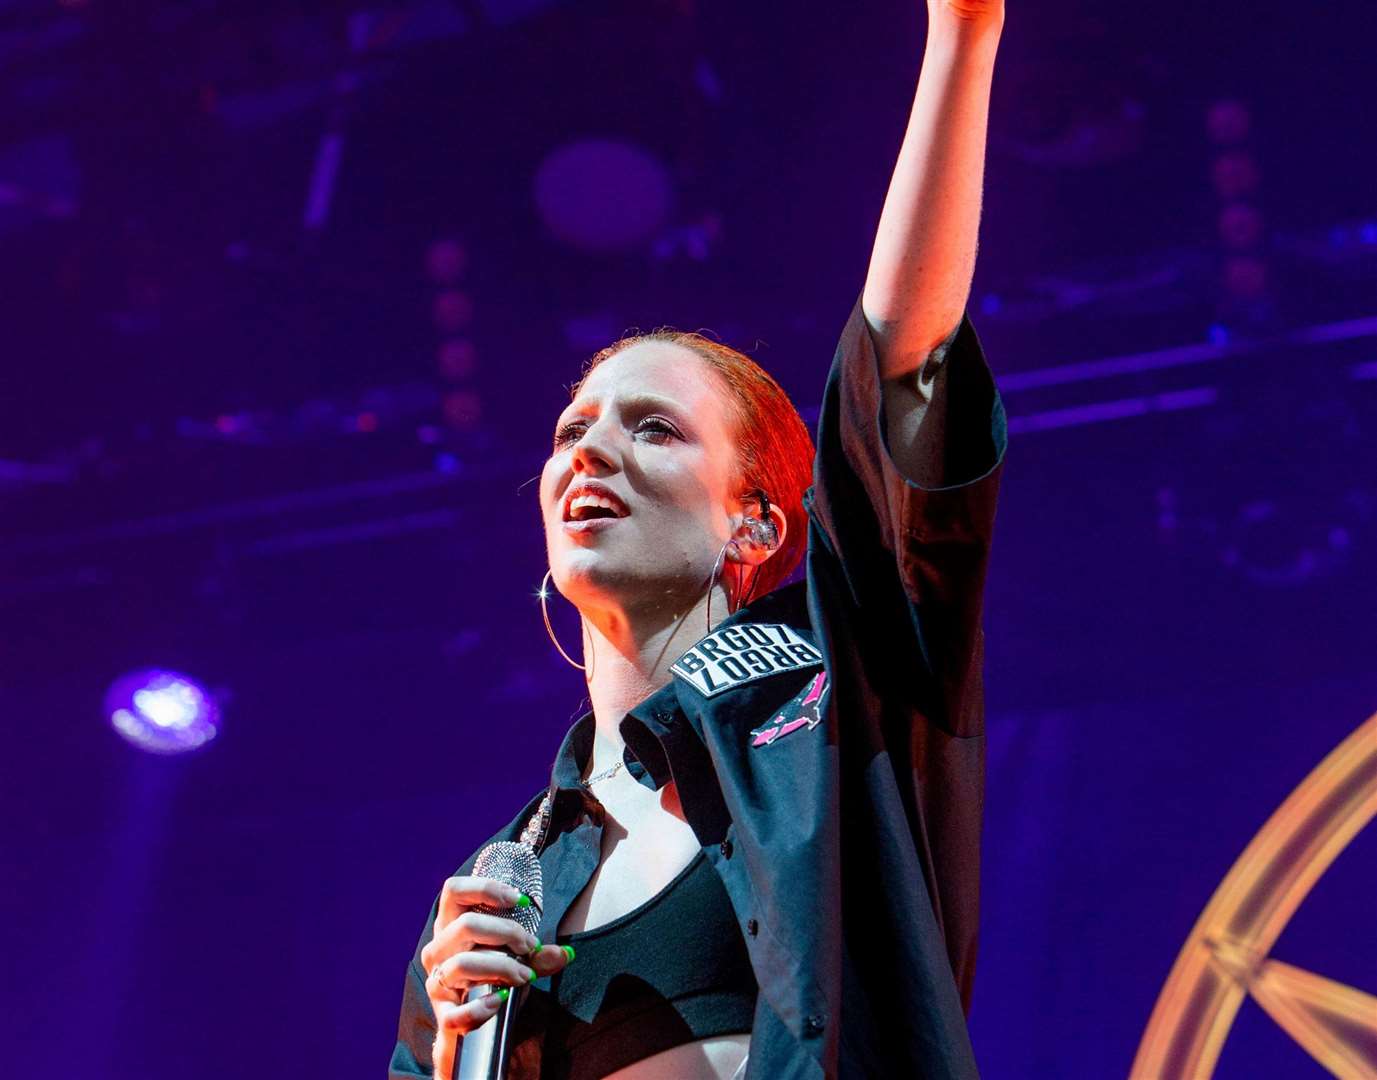 Jess Glynne will hit the scenic stage at Dreamland Margate next year